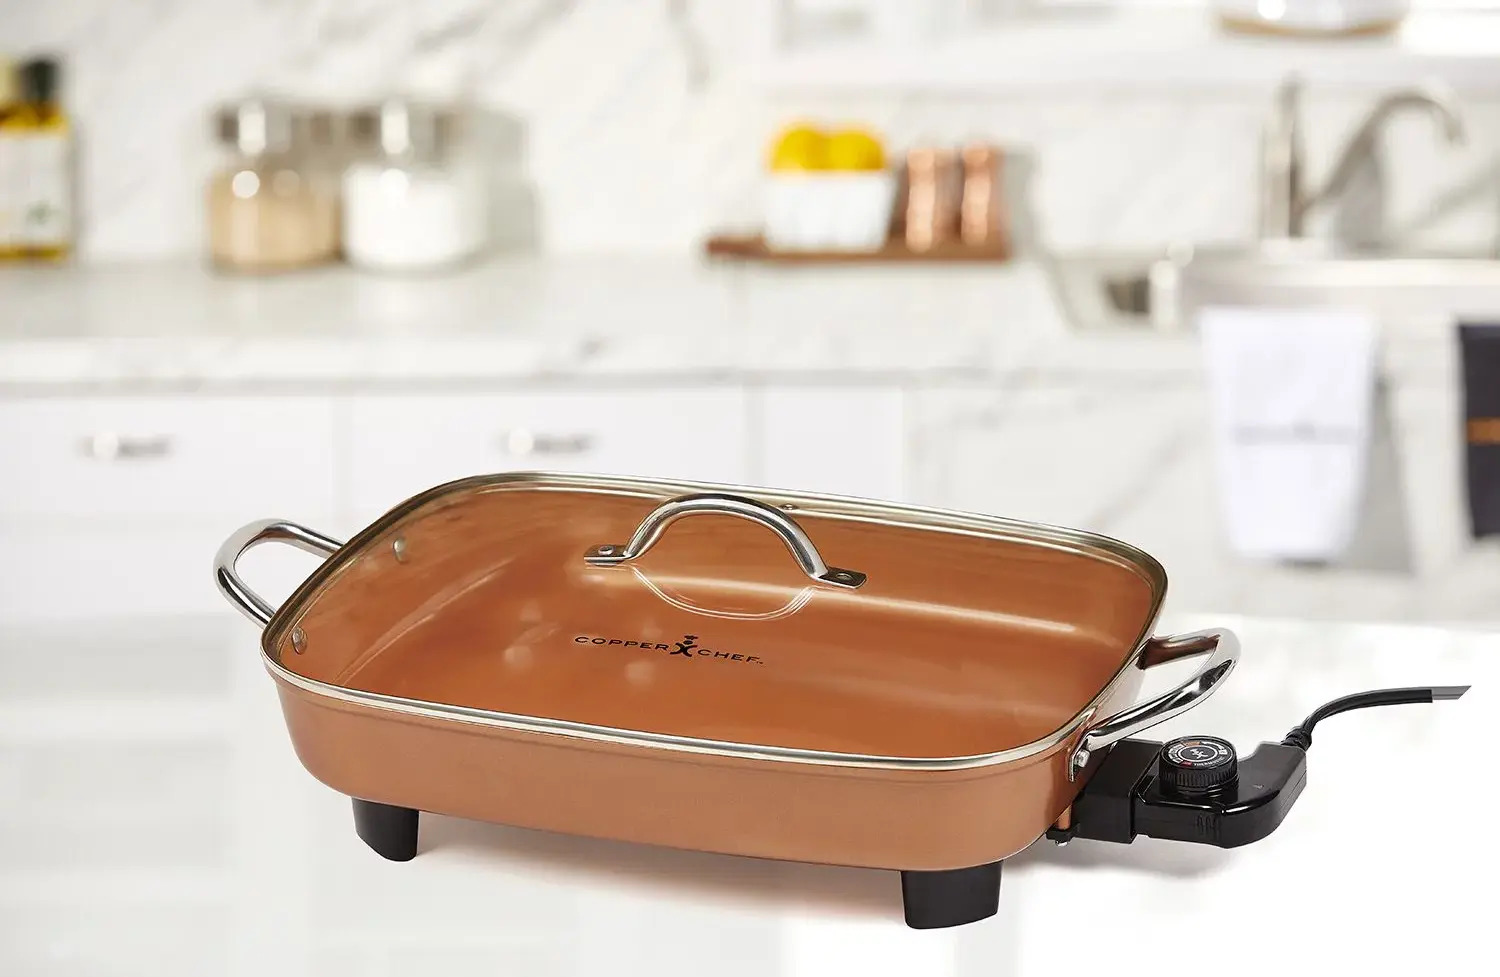 How To Fry Chicken In Copper Chef Electric Skillet